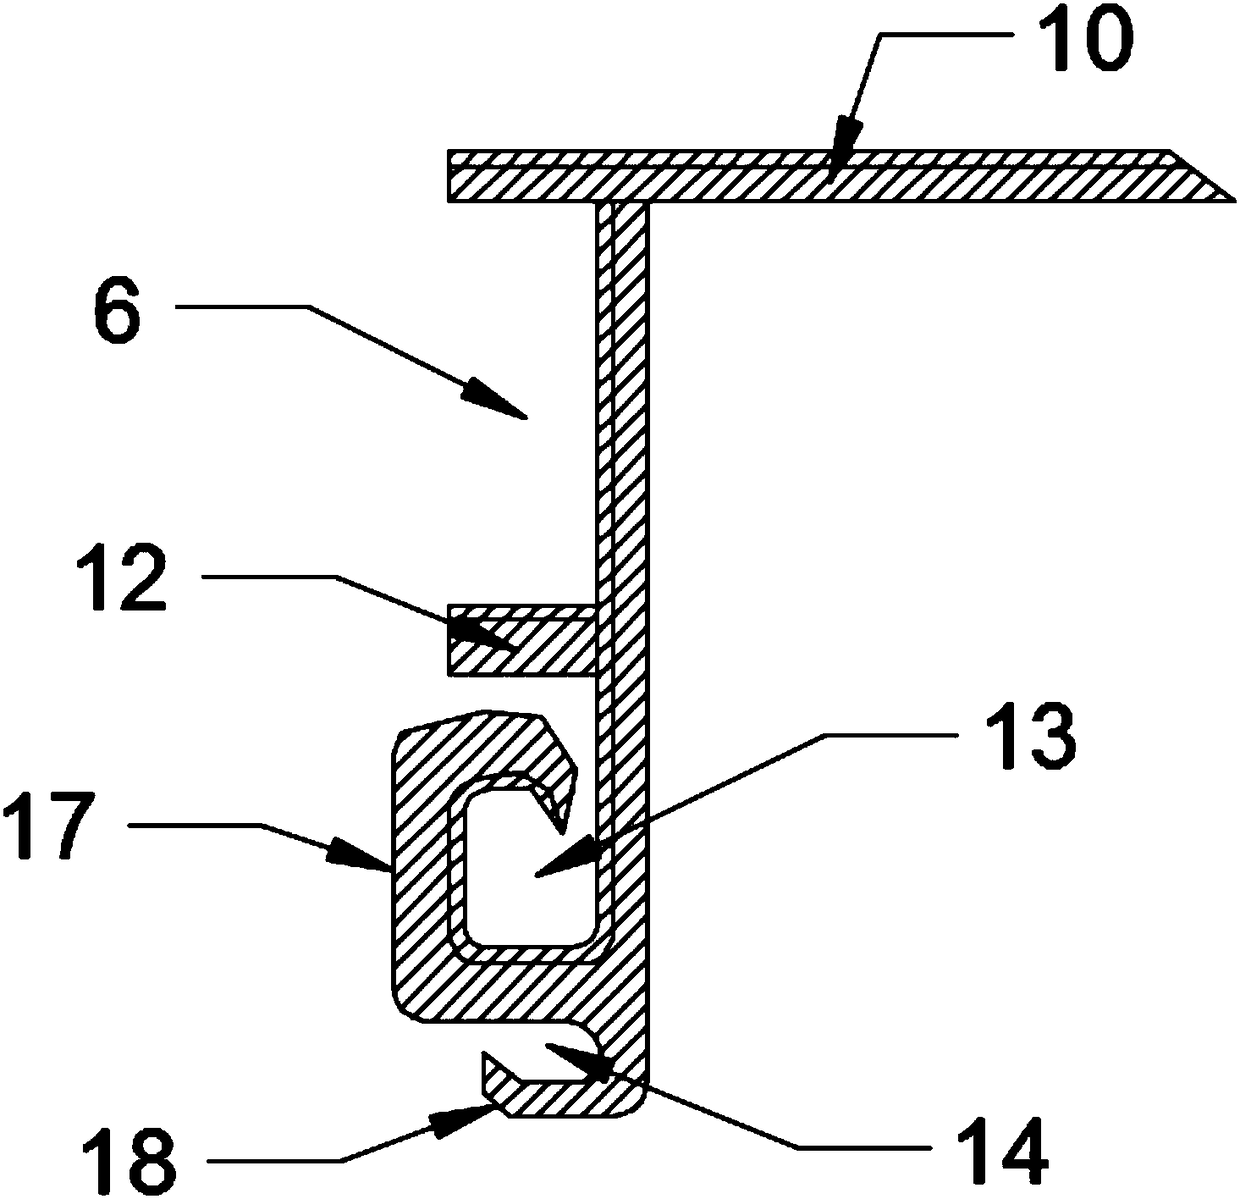 Waterproof connection structure for building deformation joint